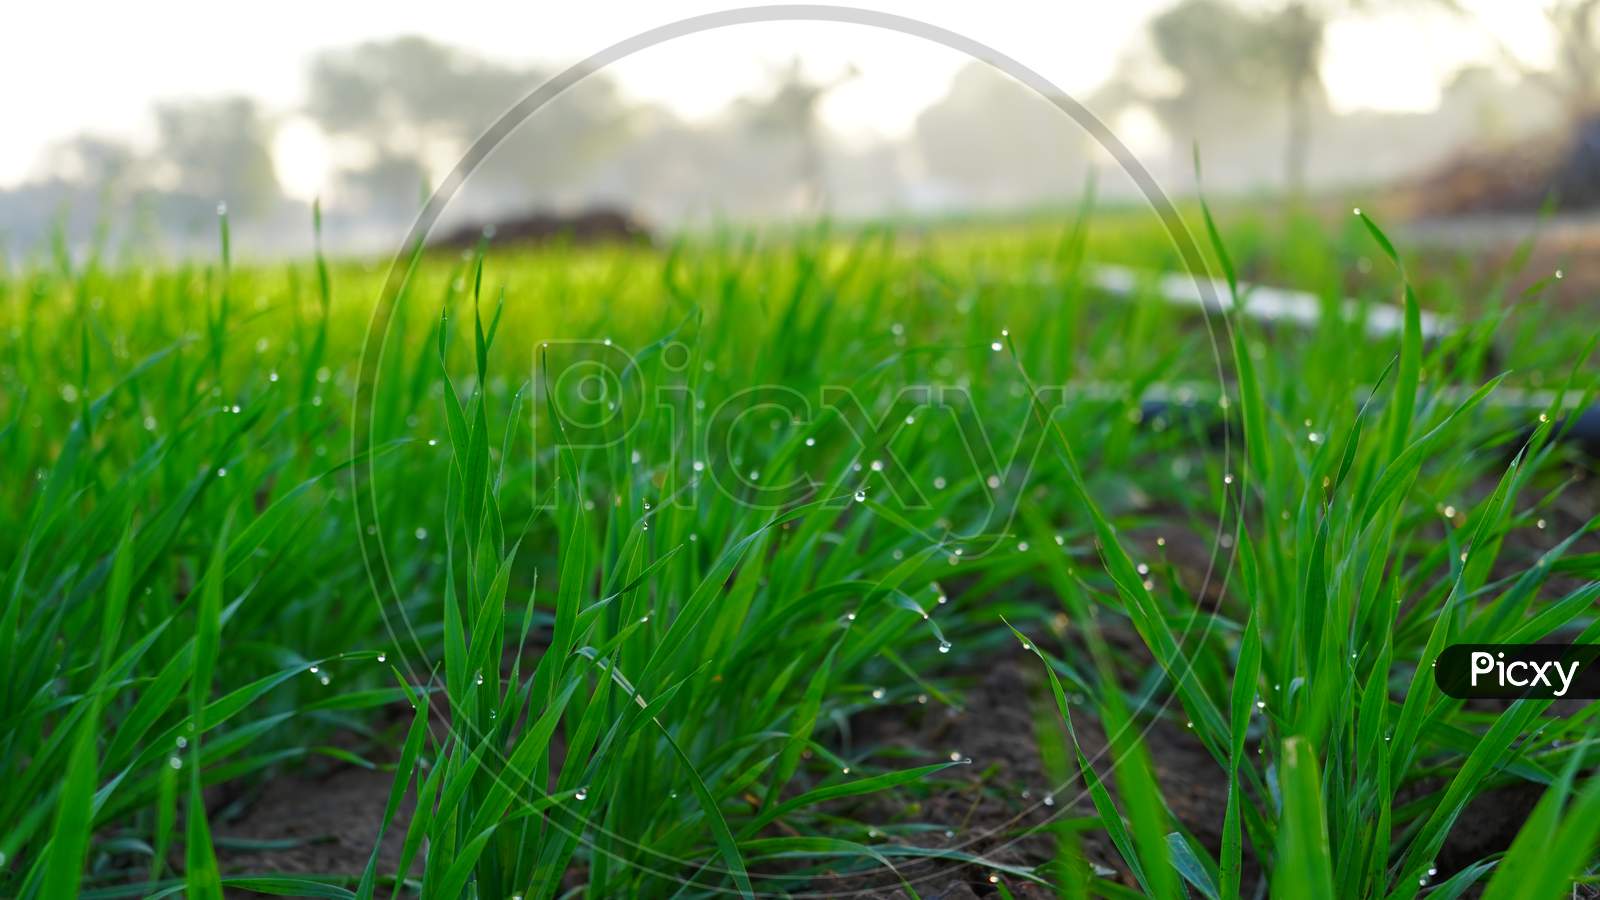 Water Drops Of Dew On Young Sprouts Of Wheat Or Triticum Plants. Greenish Leaves With Attractive Green Landscape.